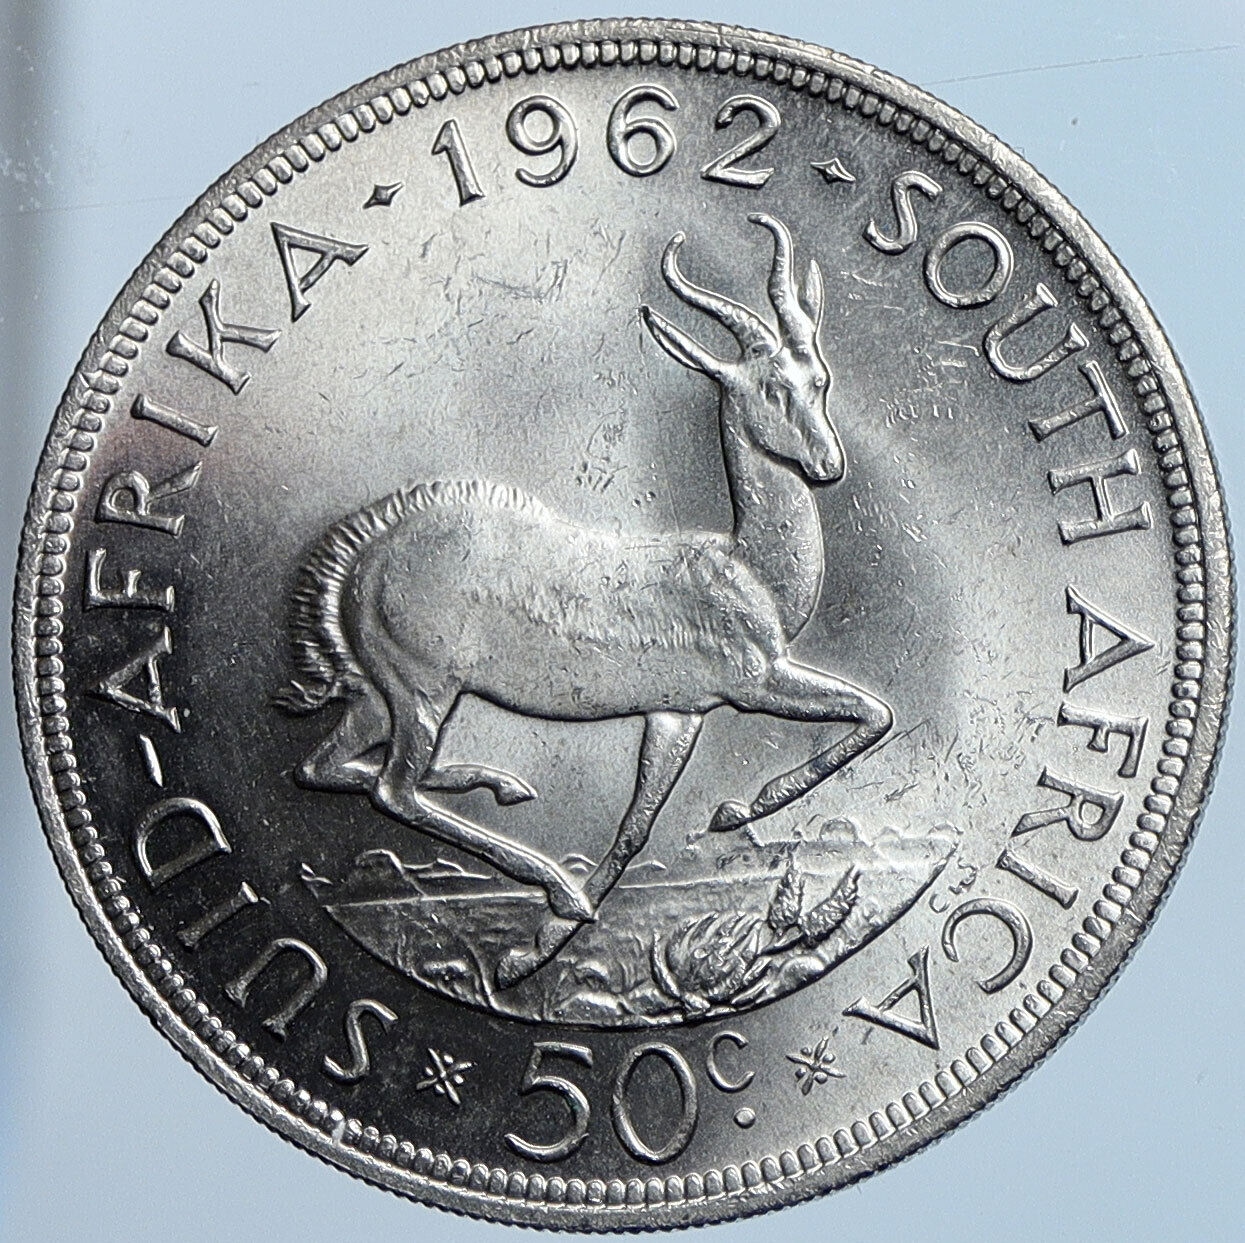 1962 SOUTH AFRICA Founder Jan van Riebeeck Deer OLD Silver 50 Cents Coin i114554